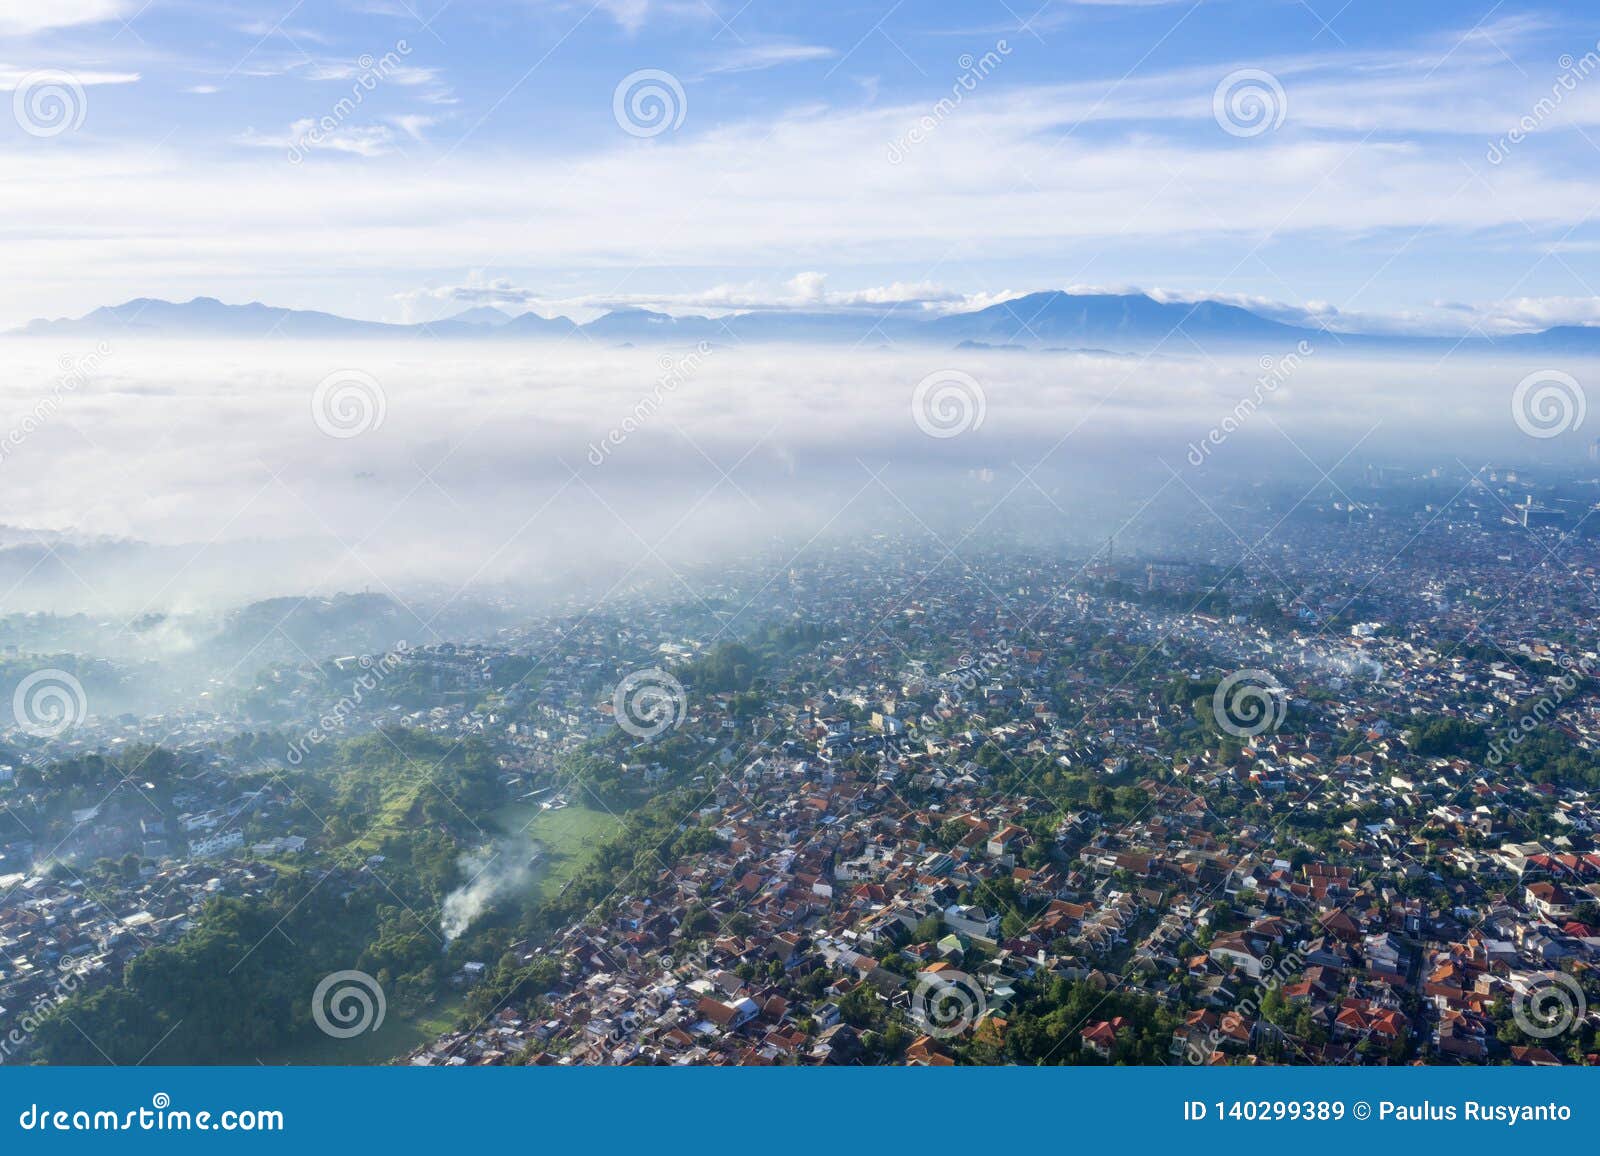 beautiful countryside at misty morning in bandung